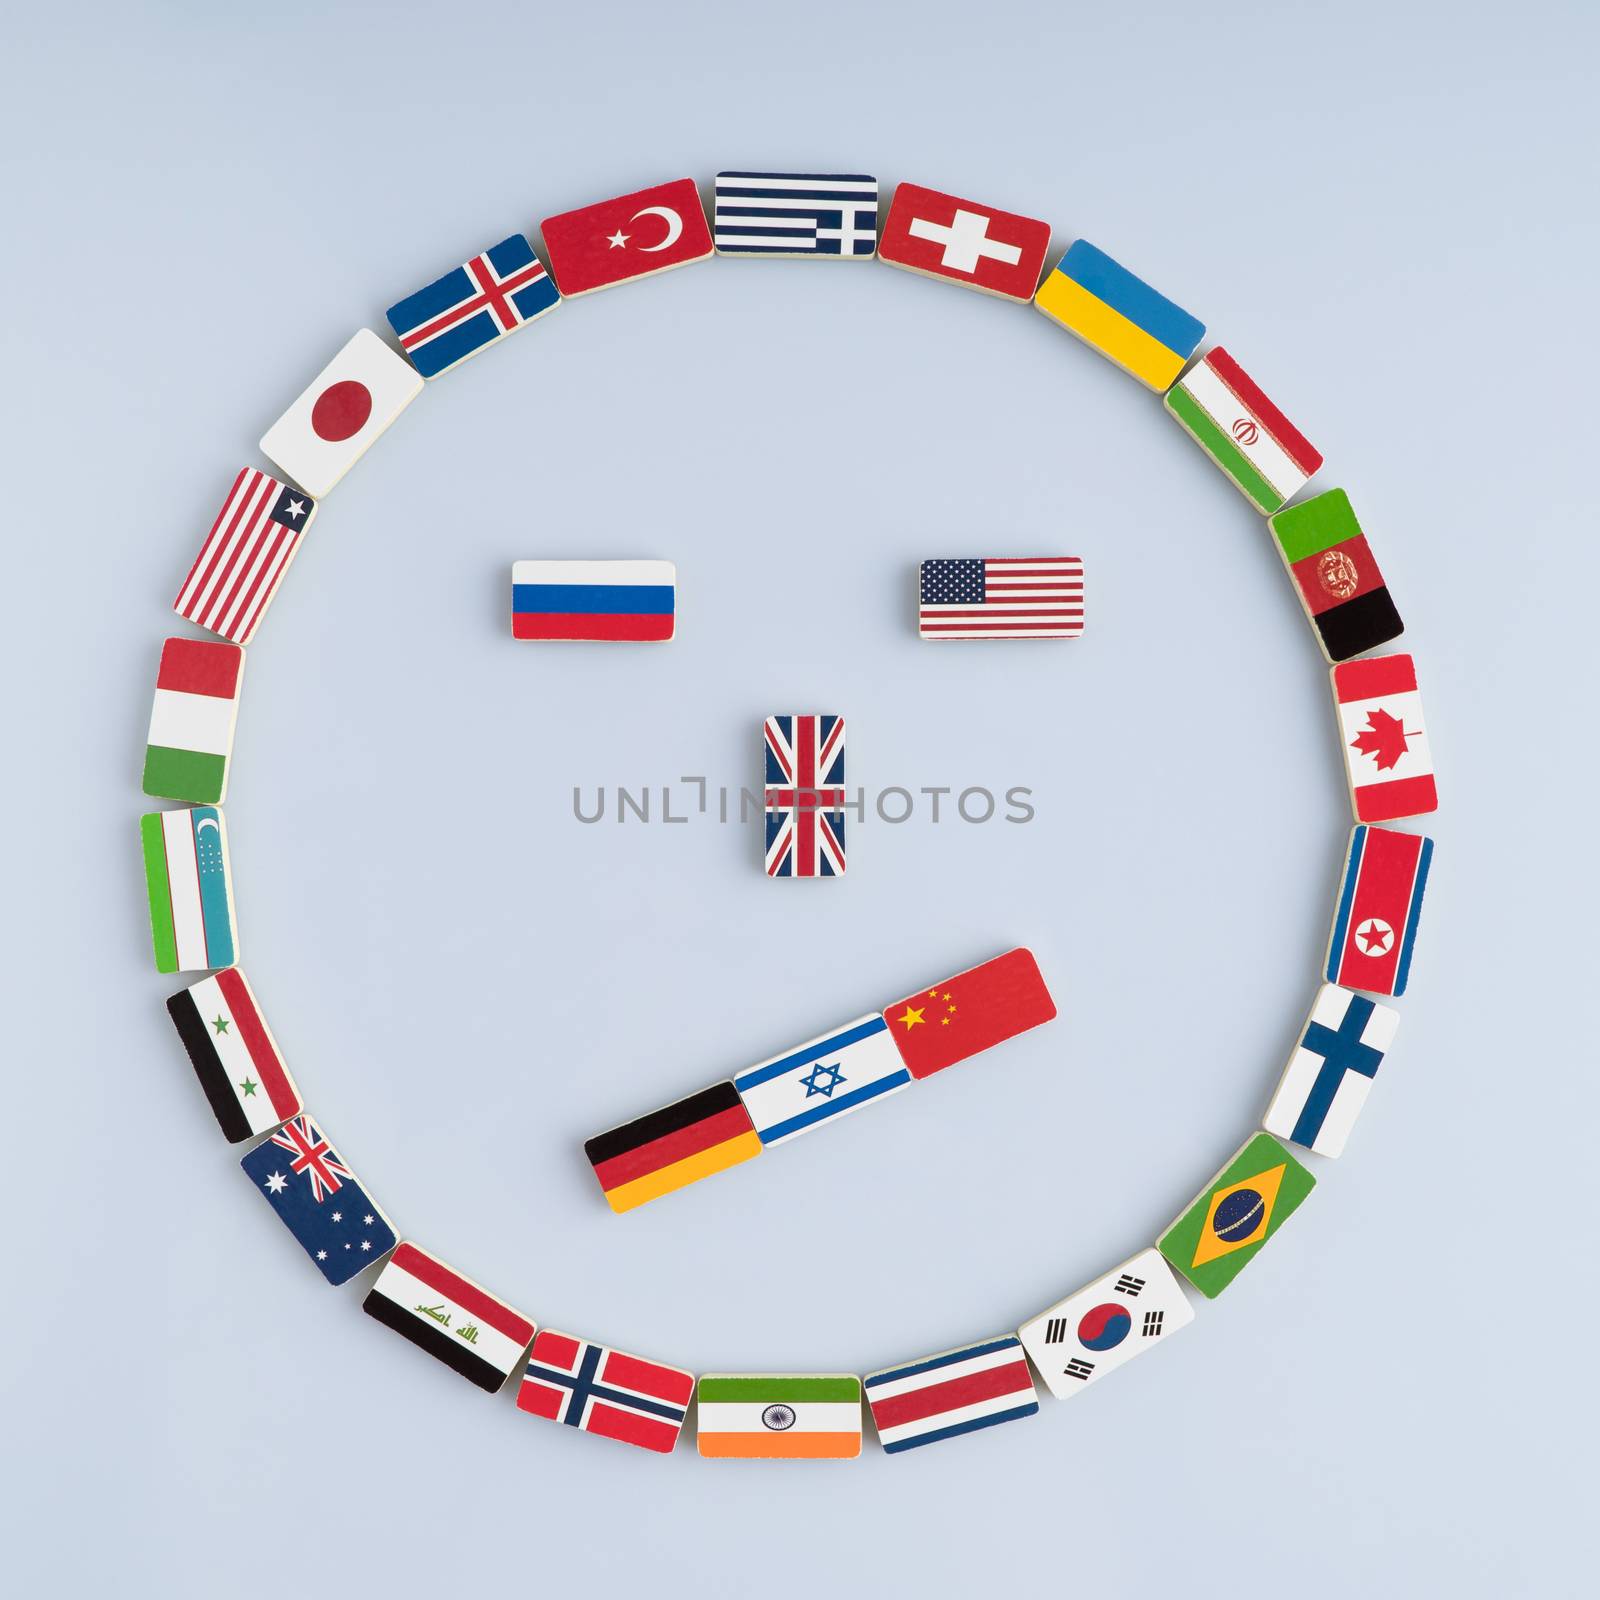 illustration of a smiley face from national flags on dominoes. Concept of peace and the Commonwealth of Nations and the world order